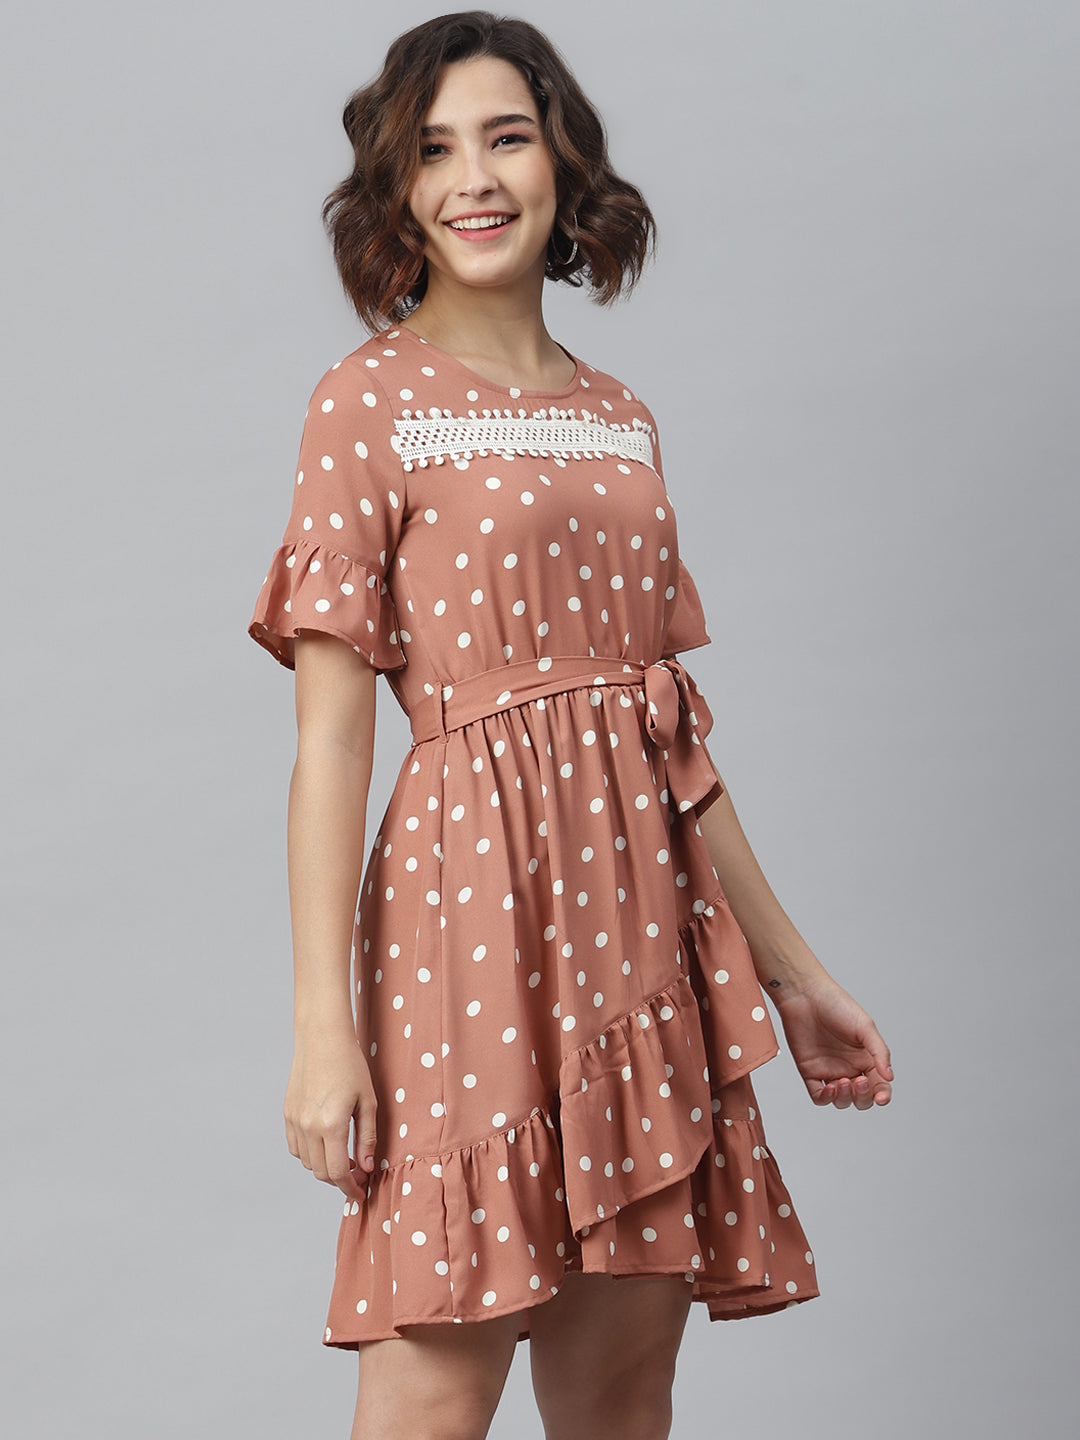 Women's Brown Polka Dress with Lace detail